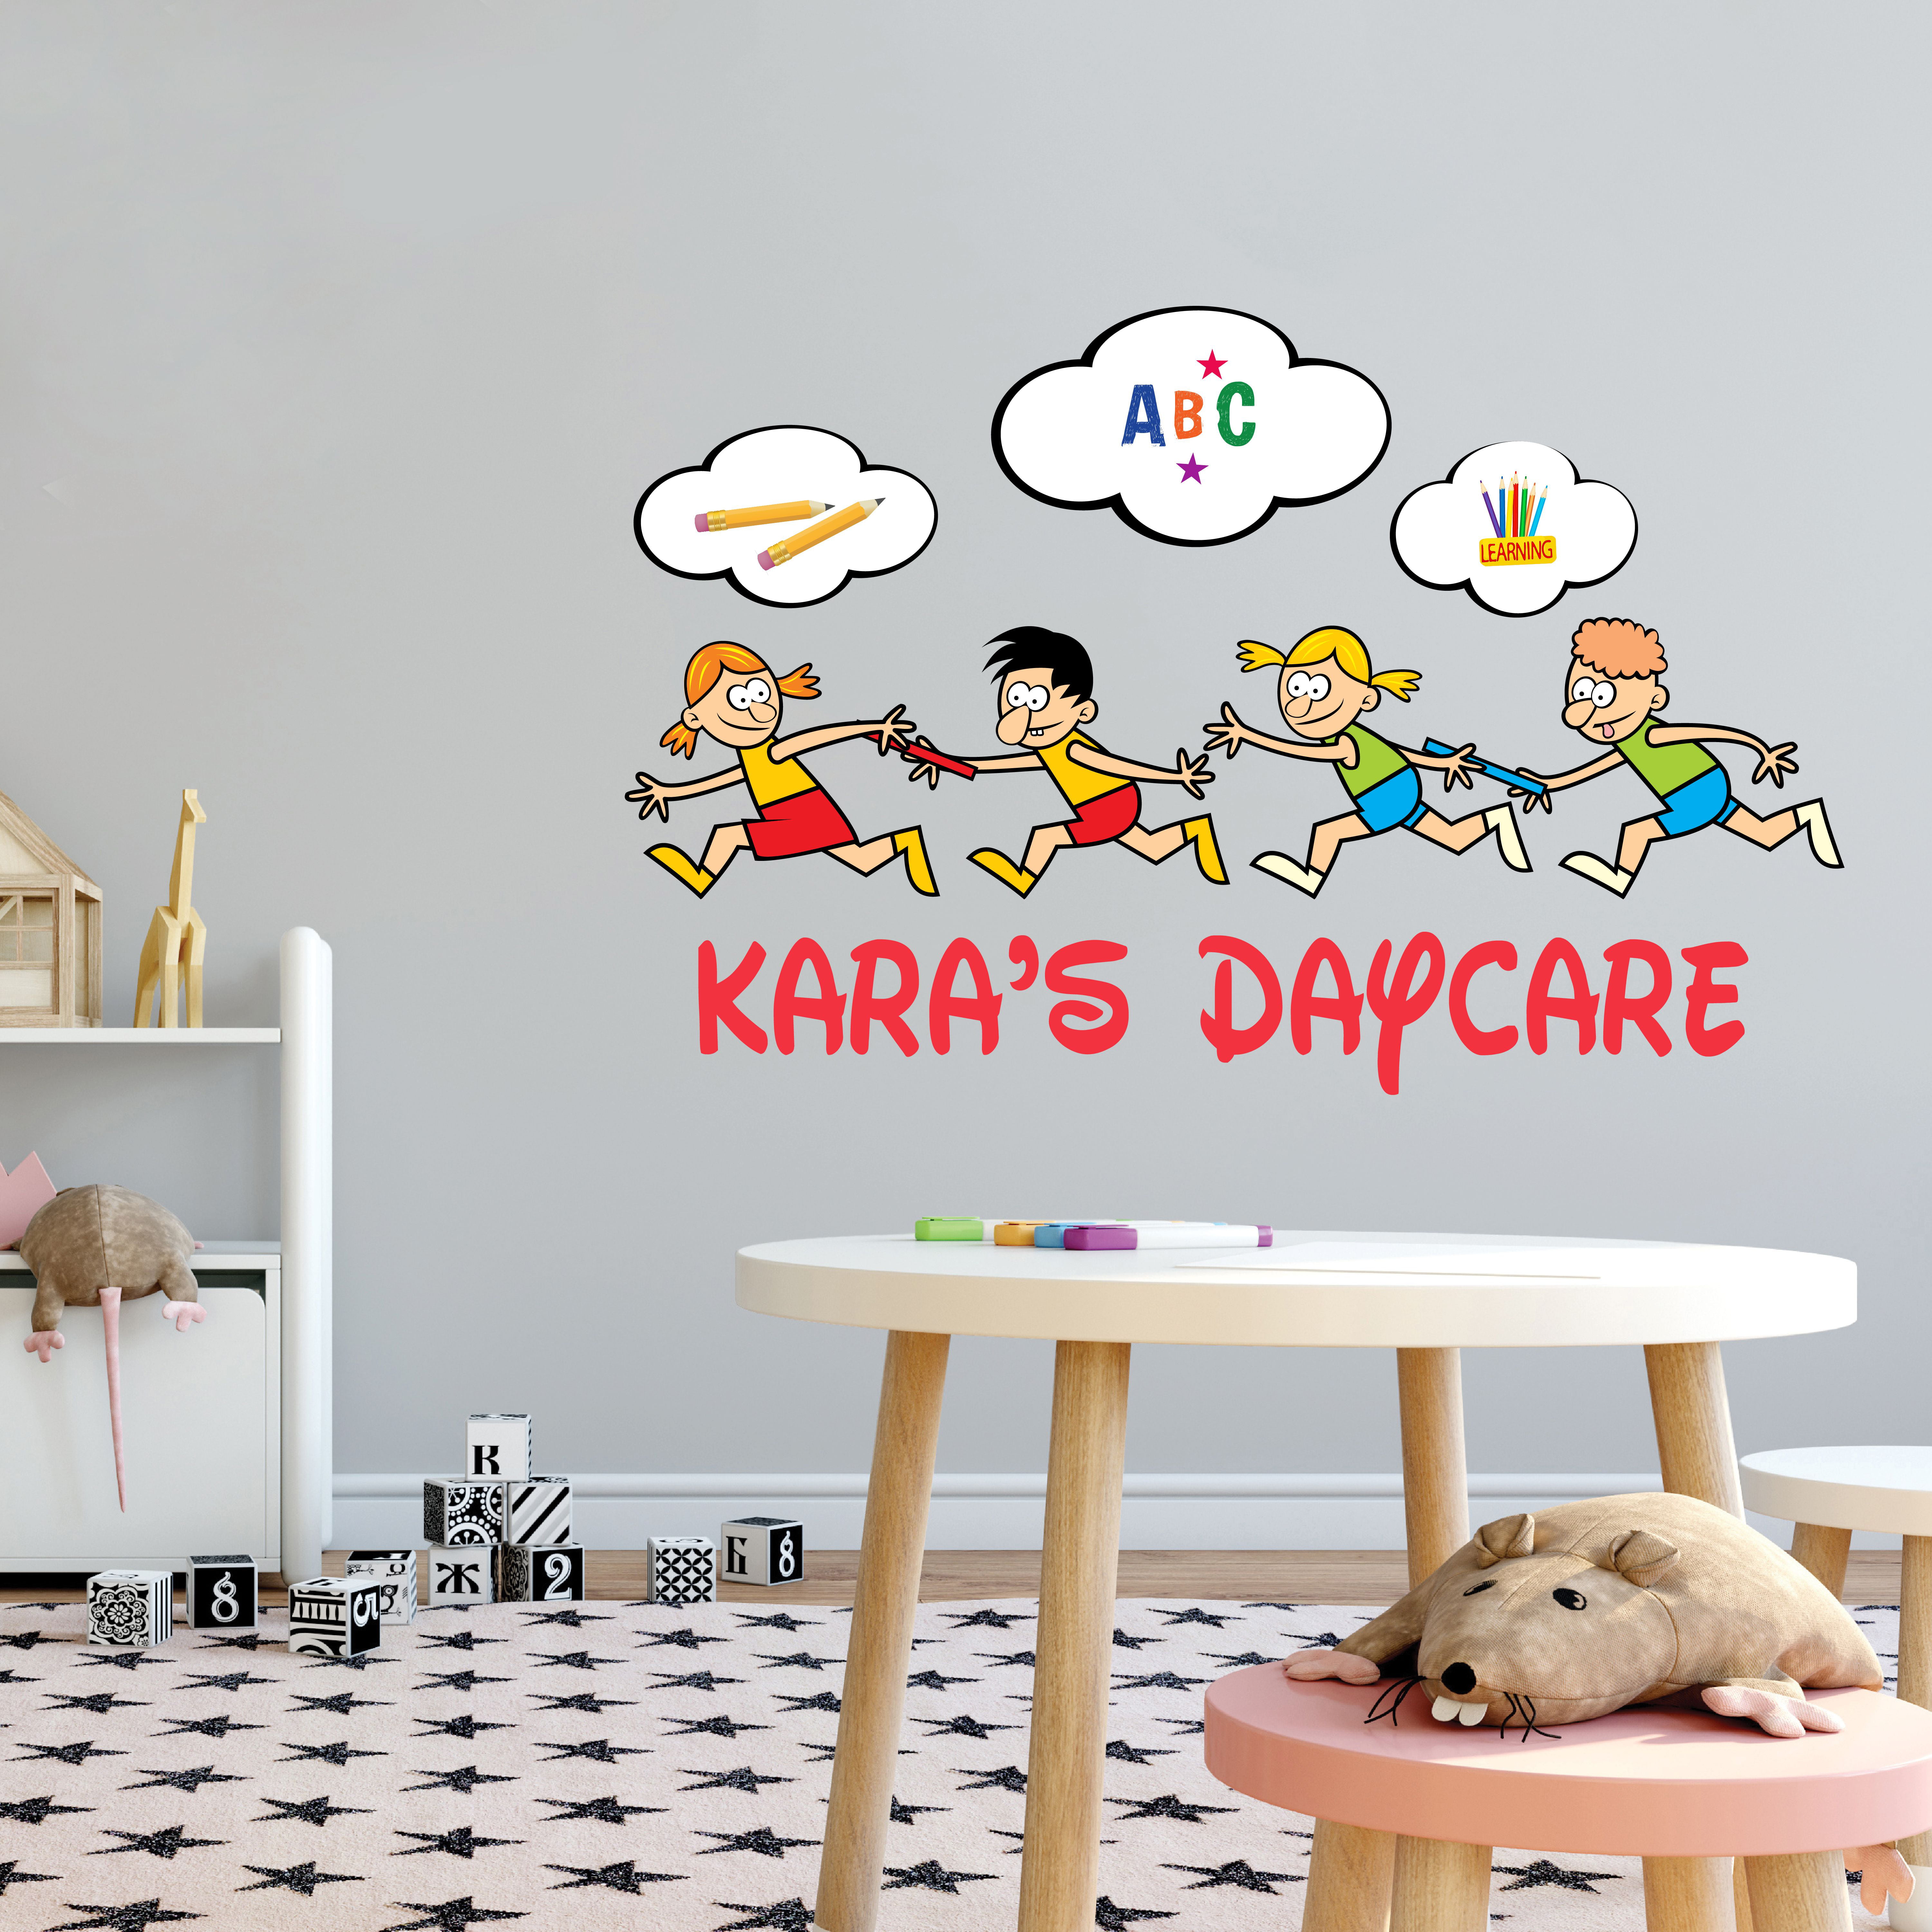 Daycare Alphabet Designs Peel and Stick Wall Decals - Daycare